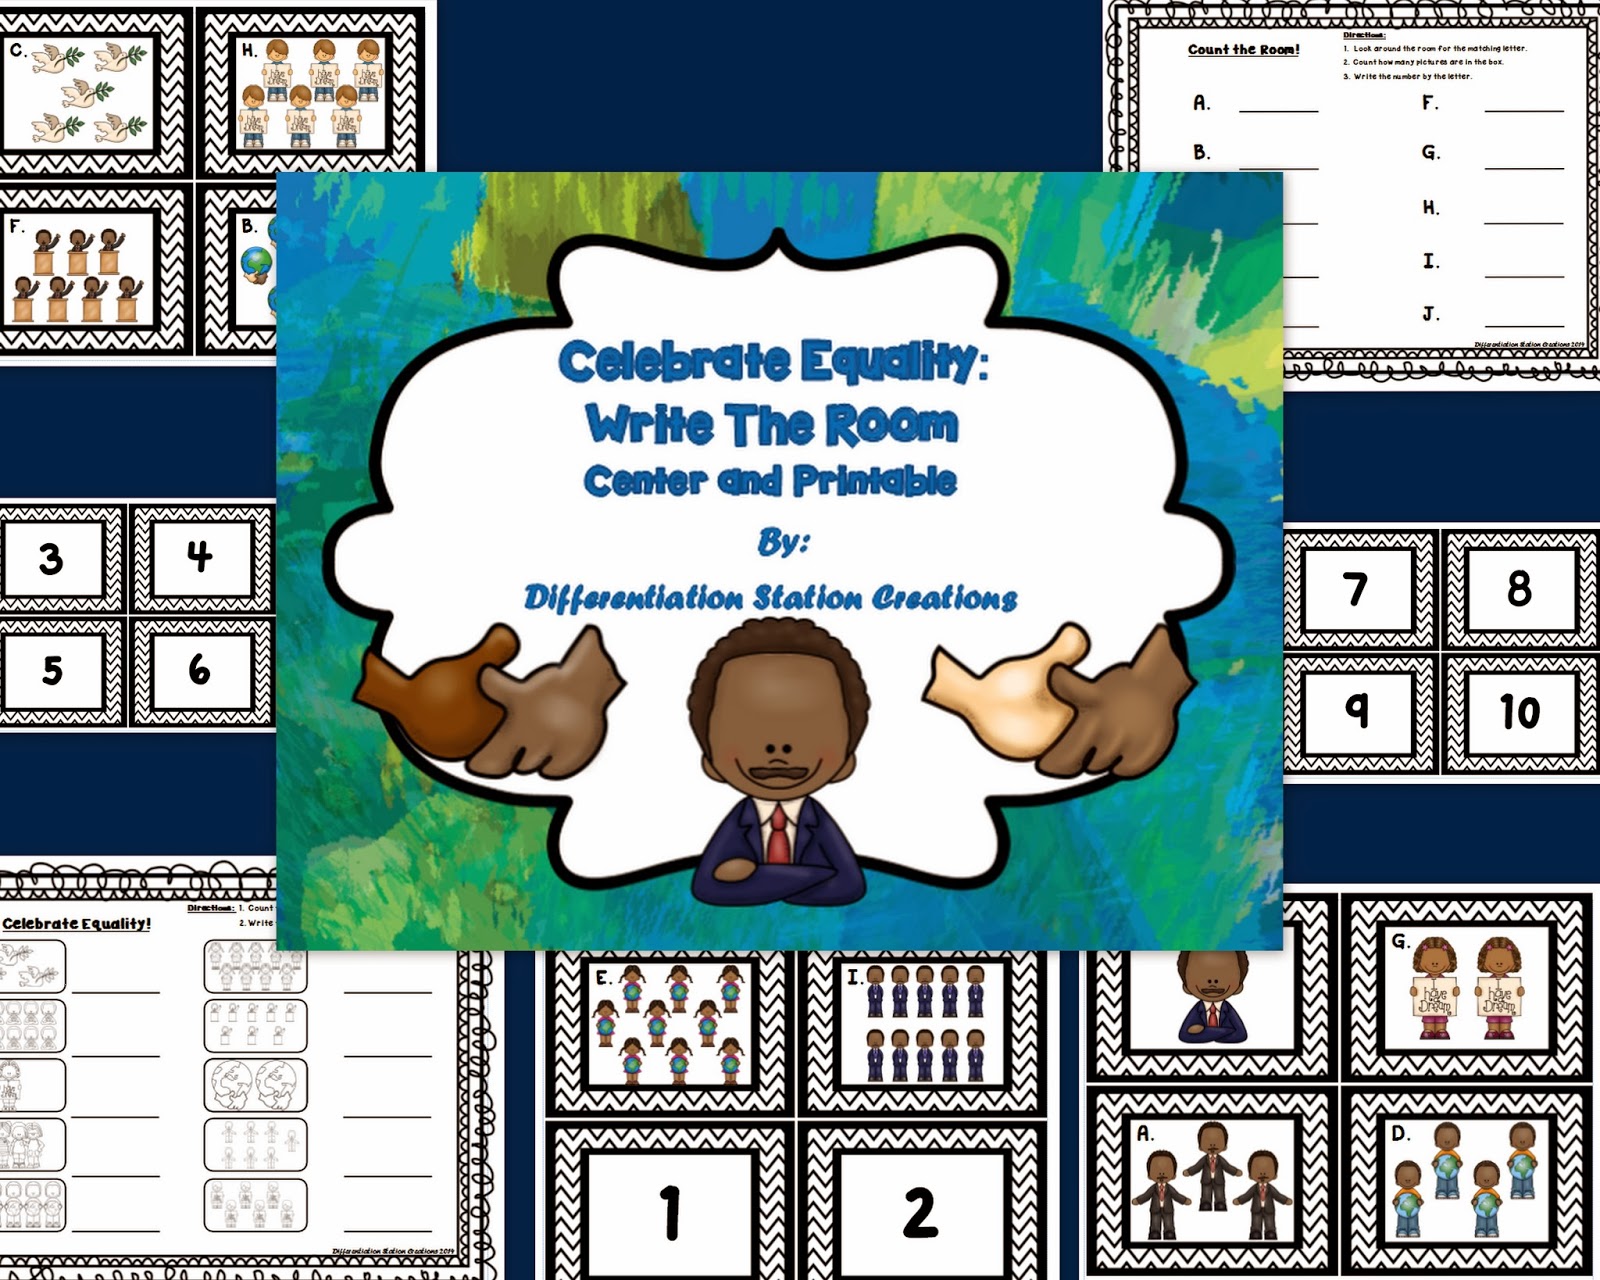 http://www.teacherspayteachers.com/Product/FREE-Celebrate-Equality-Count-and-Write-the-Room-Martin-Luther-King-Jr-1053179